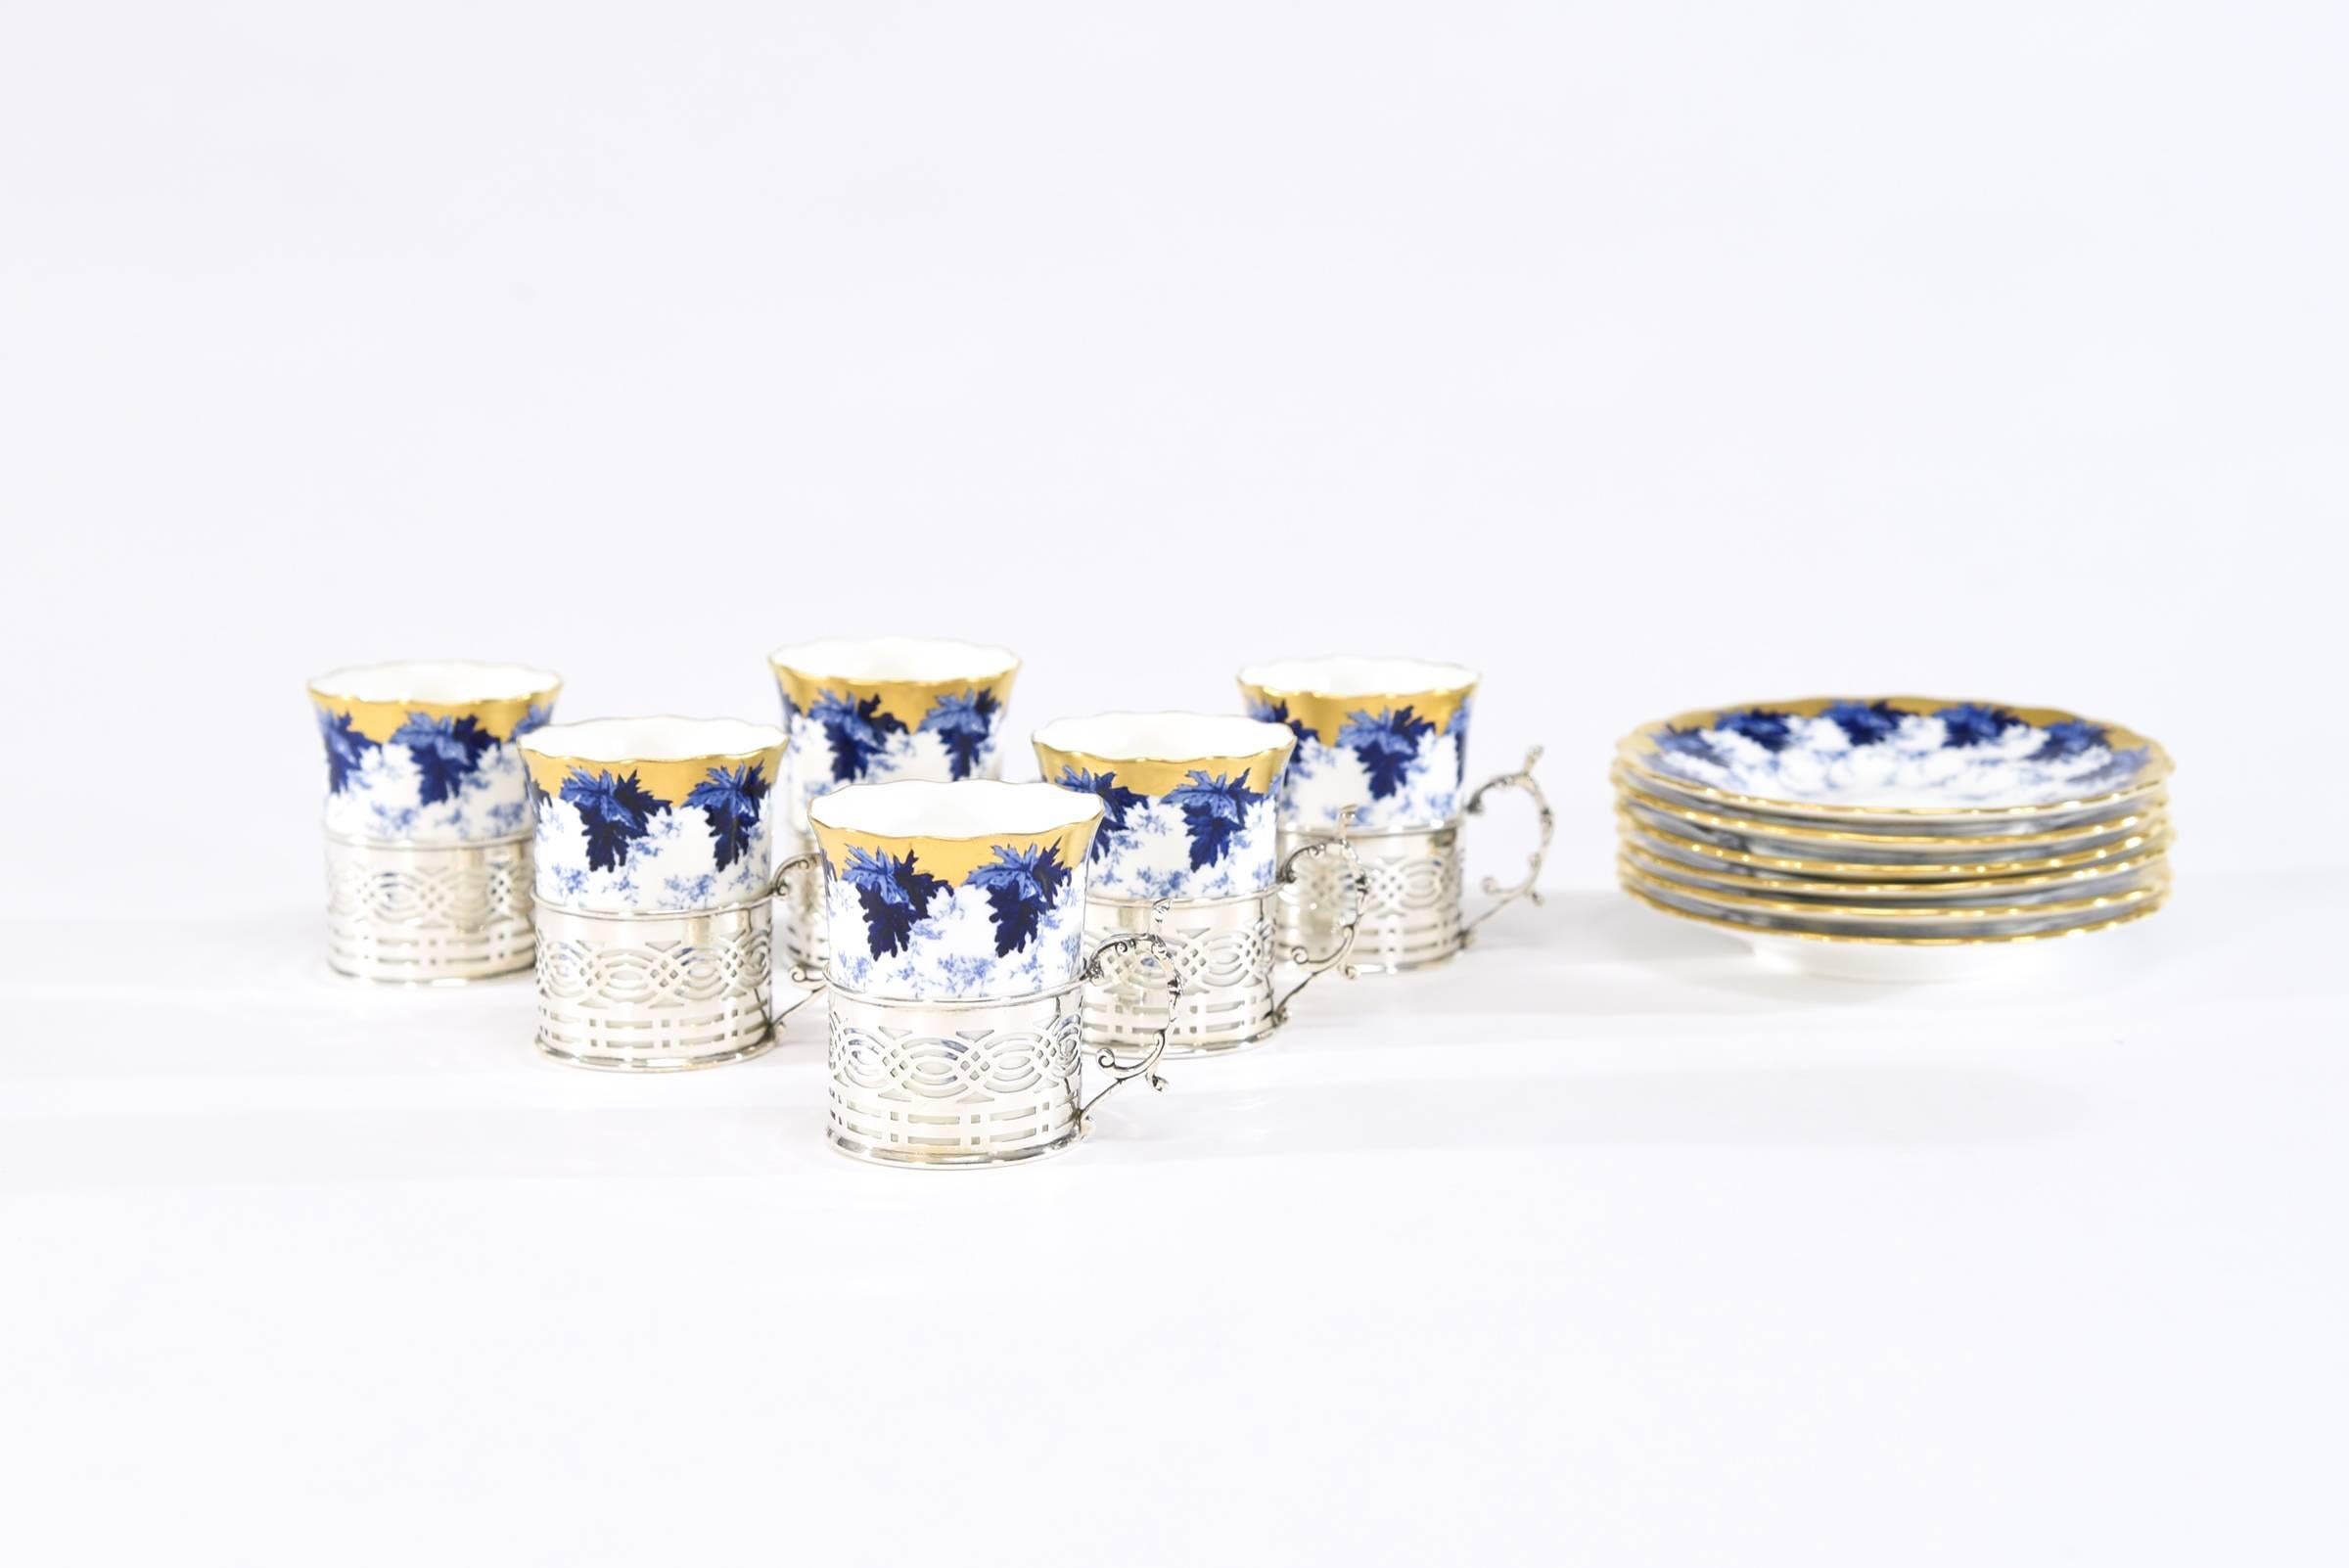 Set of 12 Coalport Cups & Saucers W/ Cobalt, Gold, Sterling Silver Fittings 2